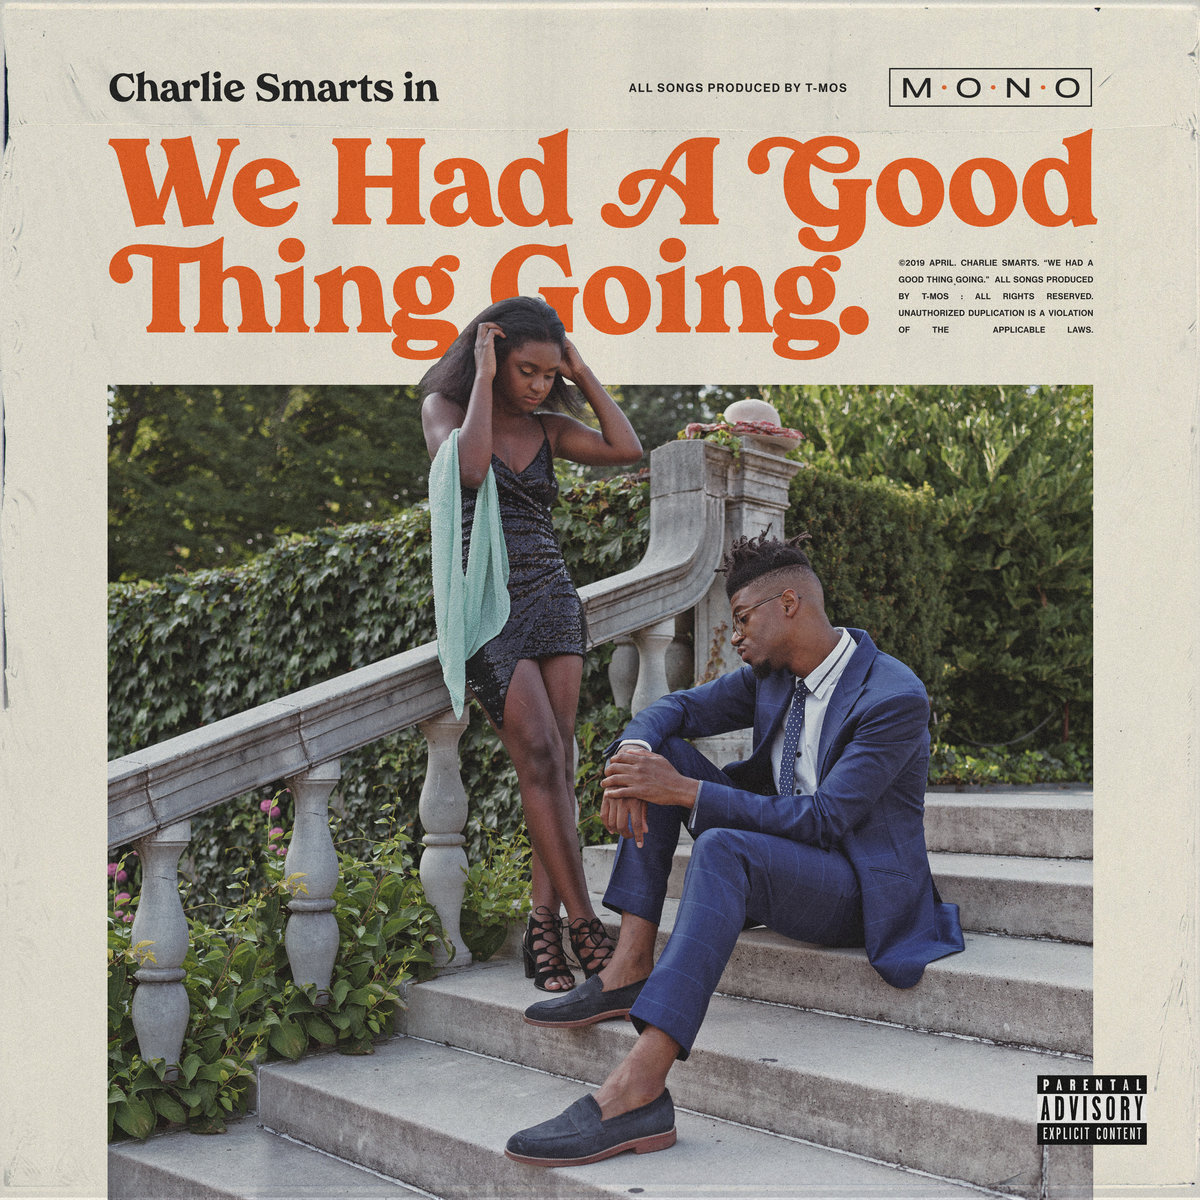 [FULL ALBUM] Charlie Smarts - We Had A Good Thing Going Mp3 Zip Fast Download Free Audio Complete